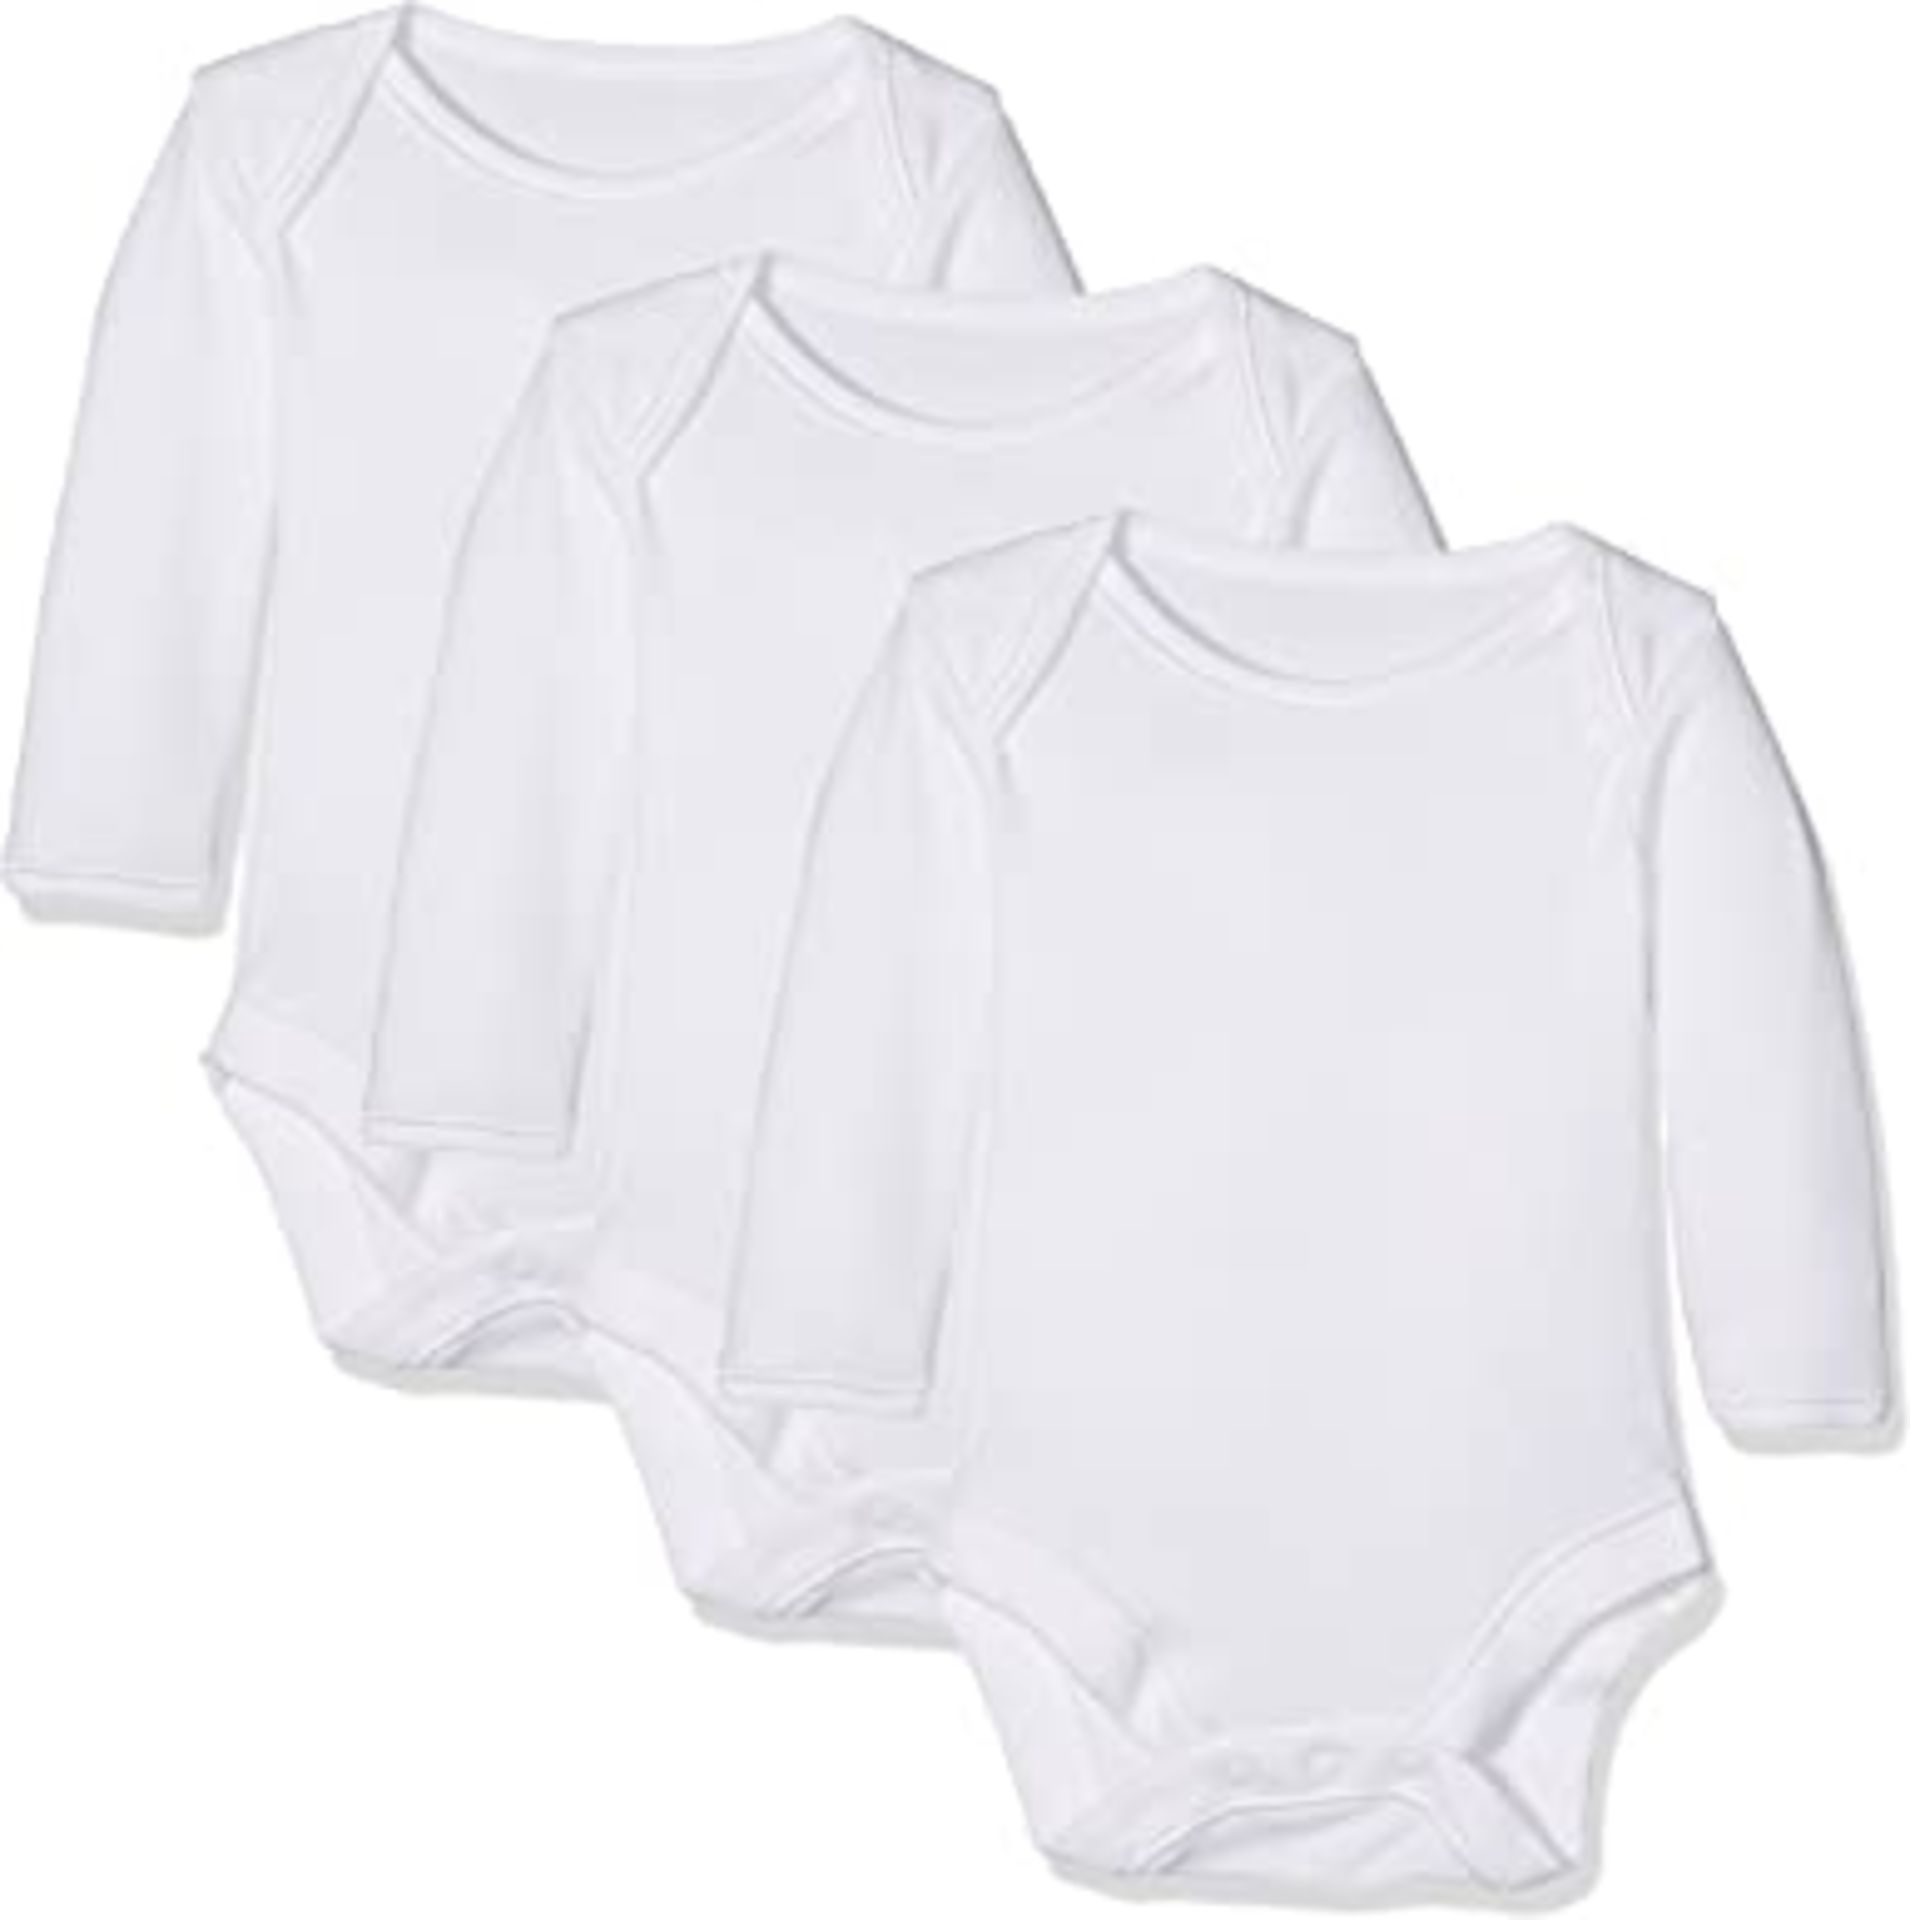 (NO VAT) 15 X NEW PACKAGED SETS OF 7 MOTHERCARE LONG SLEEVE BABY SUITS. NICKEL FREE POPPERS,